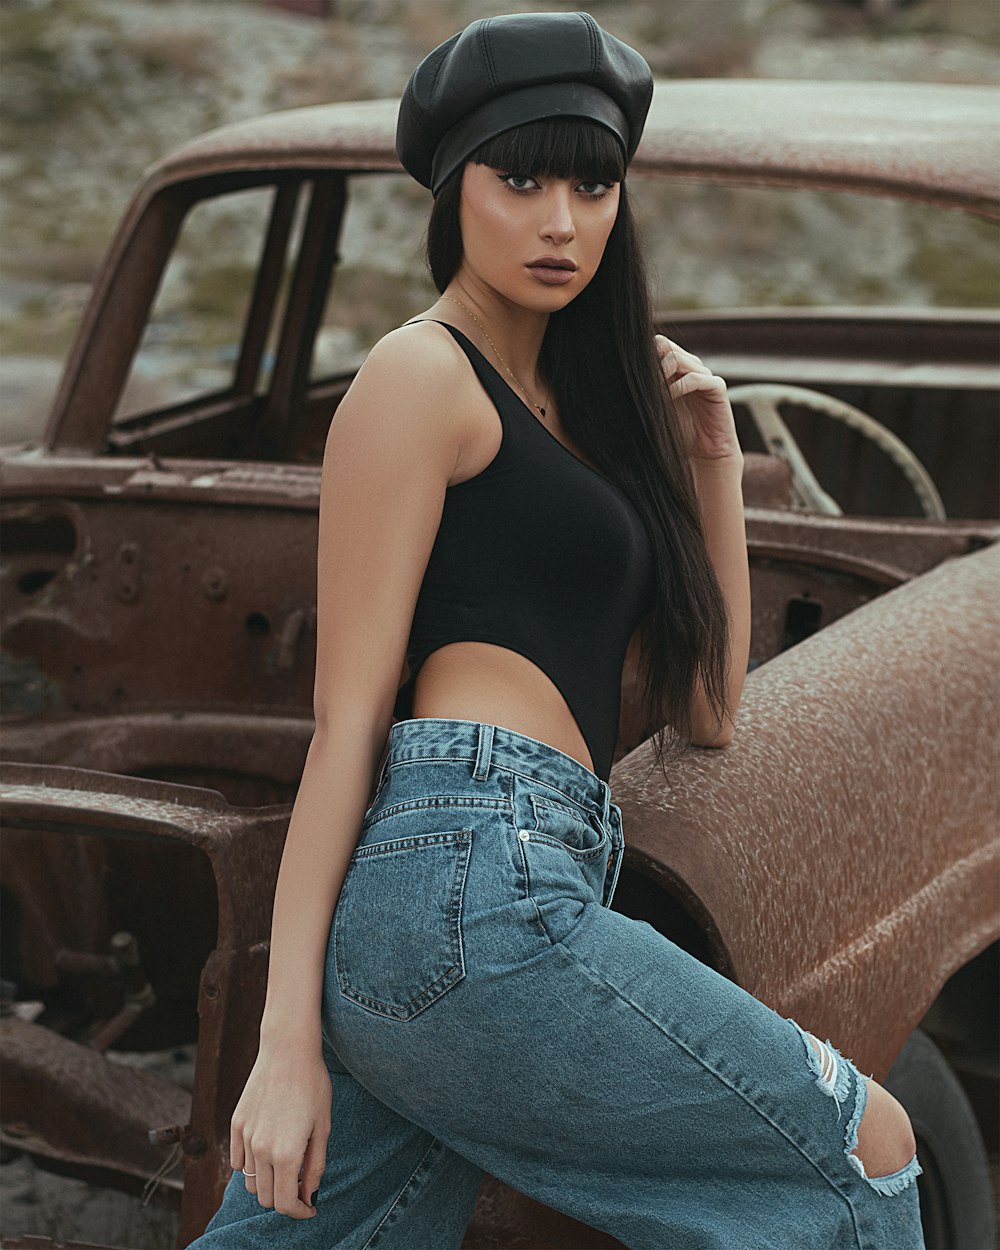 woman in black tank top and blue denim jeans sitting on brown car